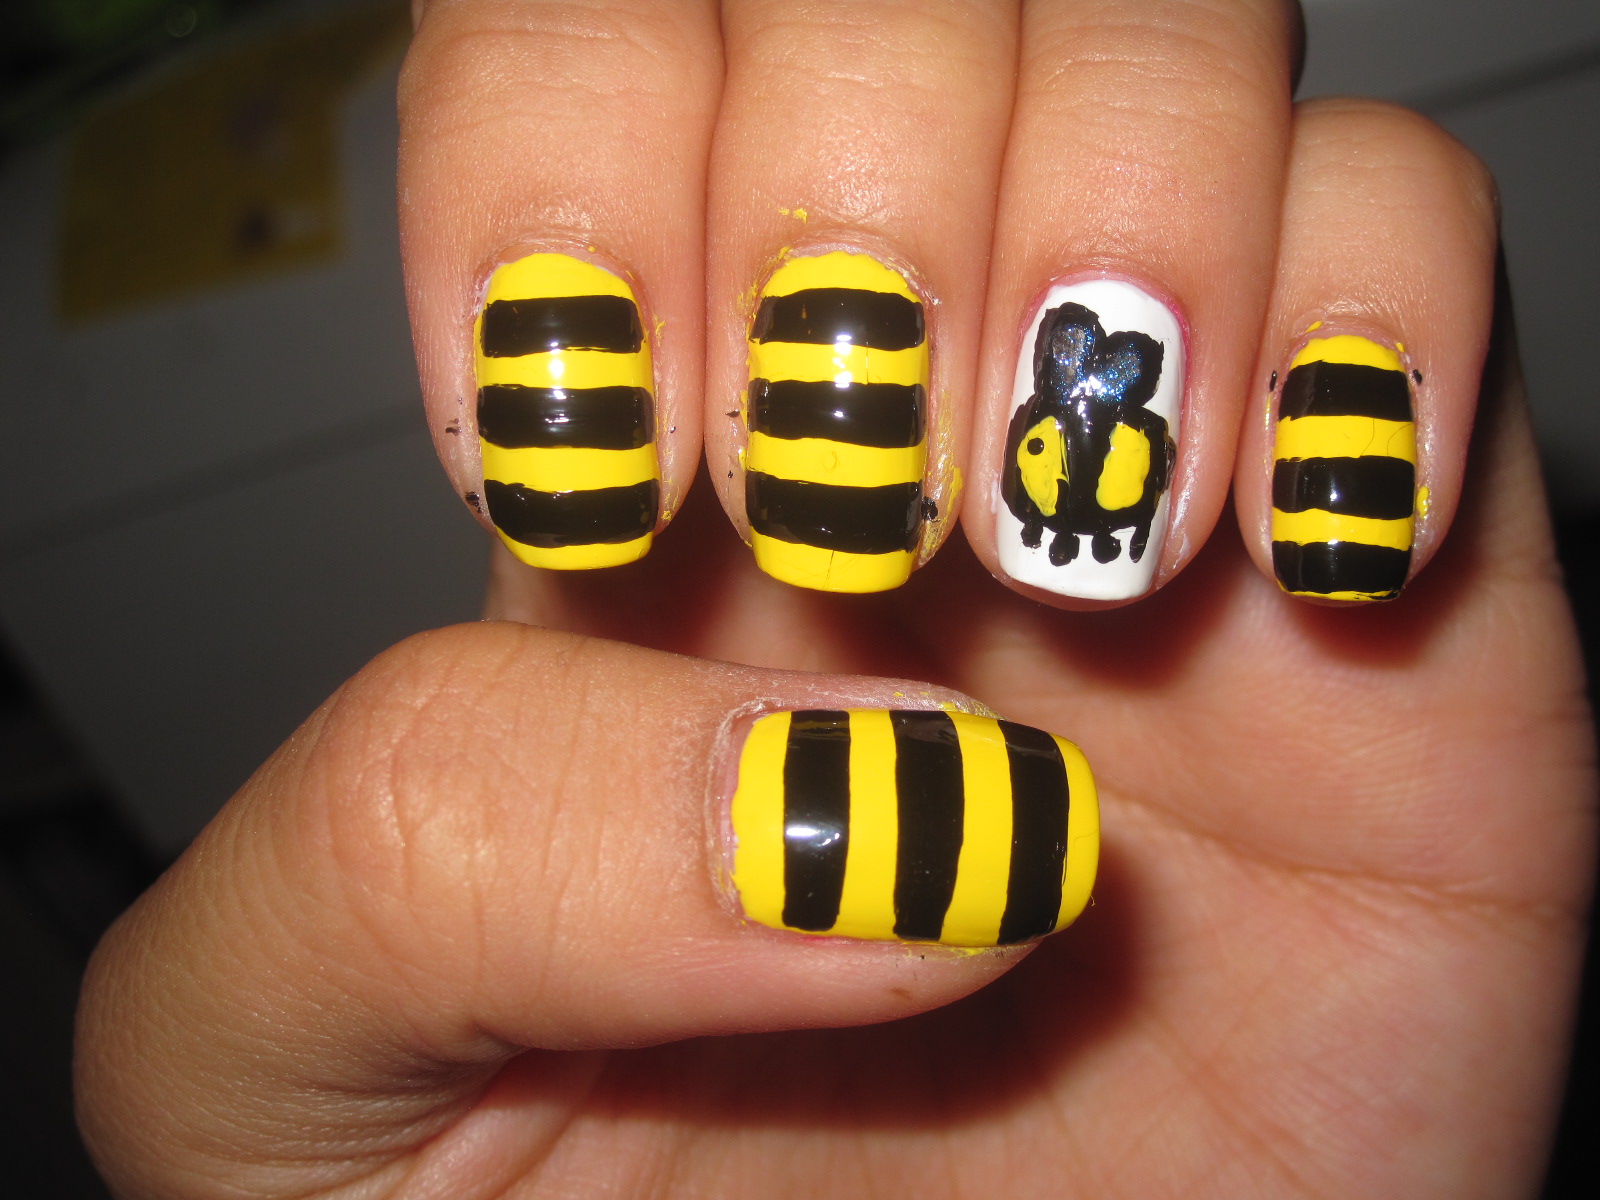 1. "Easy Bumble Bee Nail Art Tutorial" - wide 2